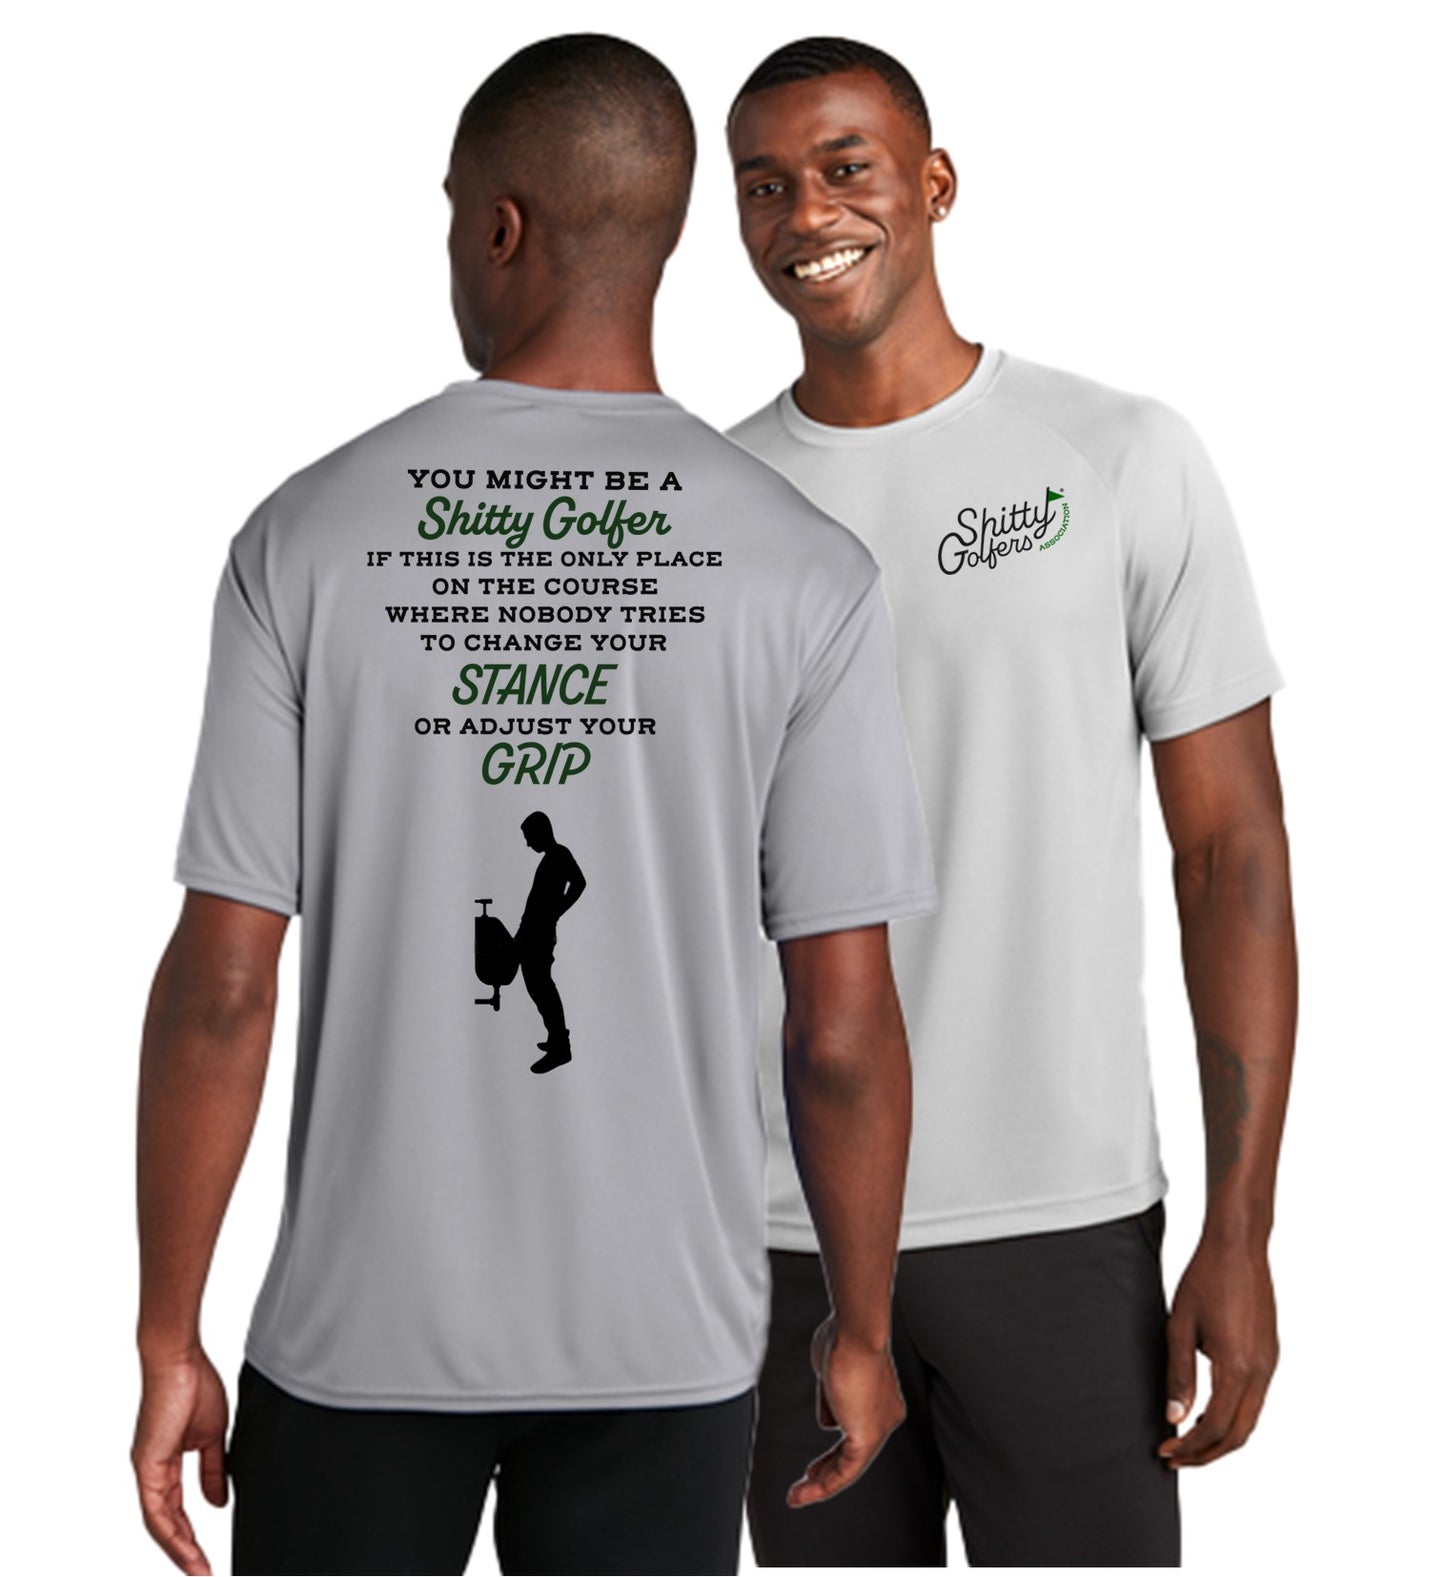 Funny Golf Shirts for Men - Humorous Golf Quotes - Funny T Shirts for Golfing - Stance/Grip